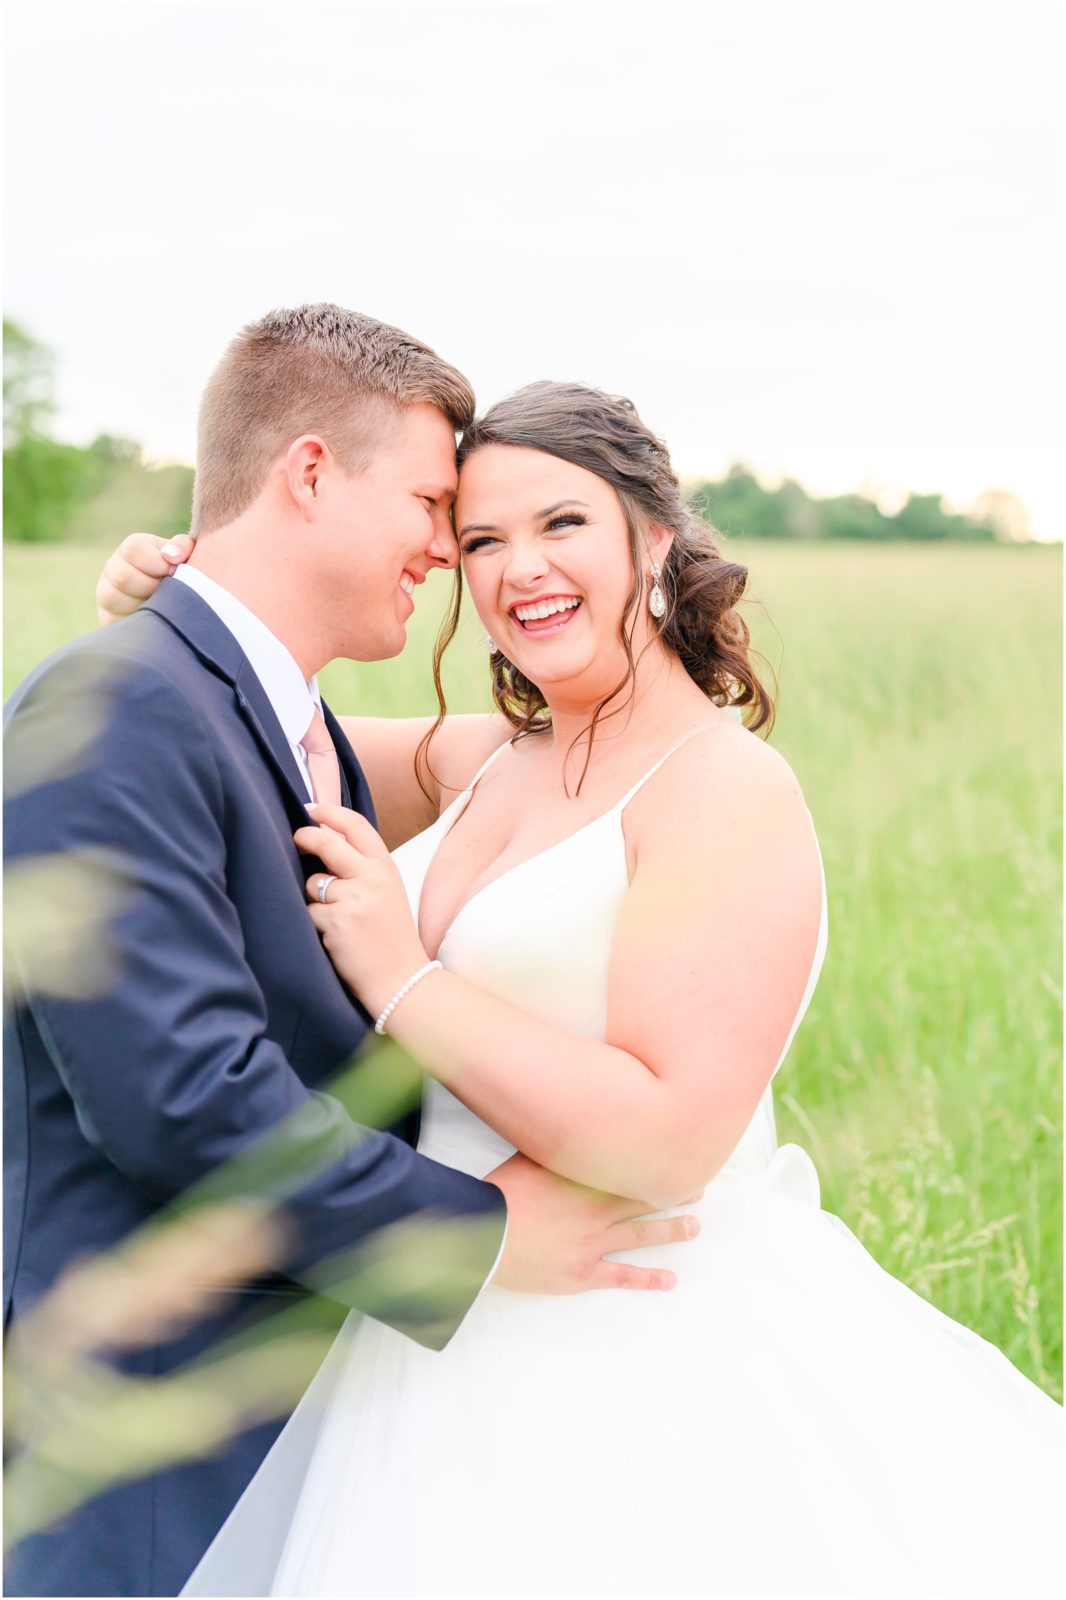 Bride and groom nuzzling and laughing Loogootee Indiana summer wedding